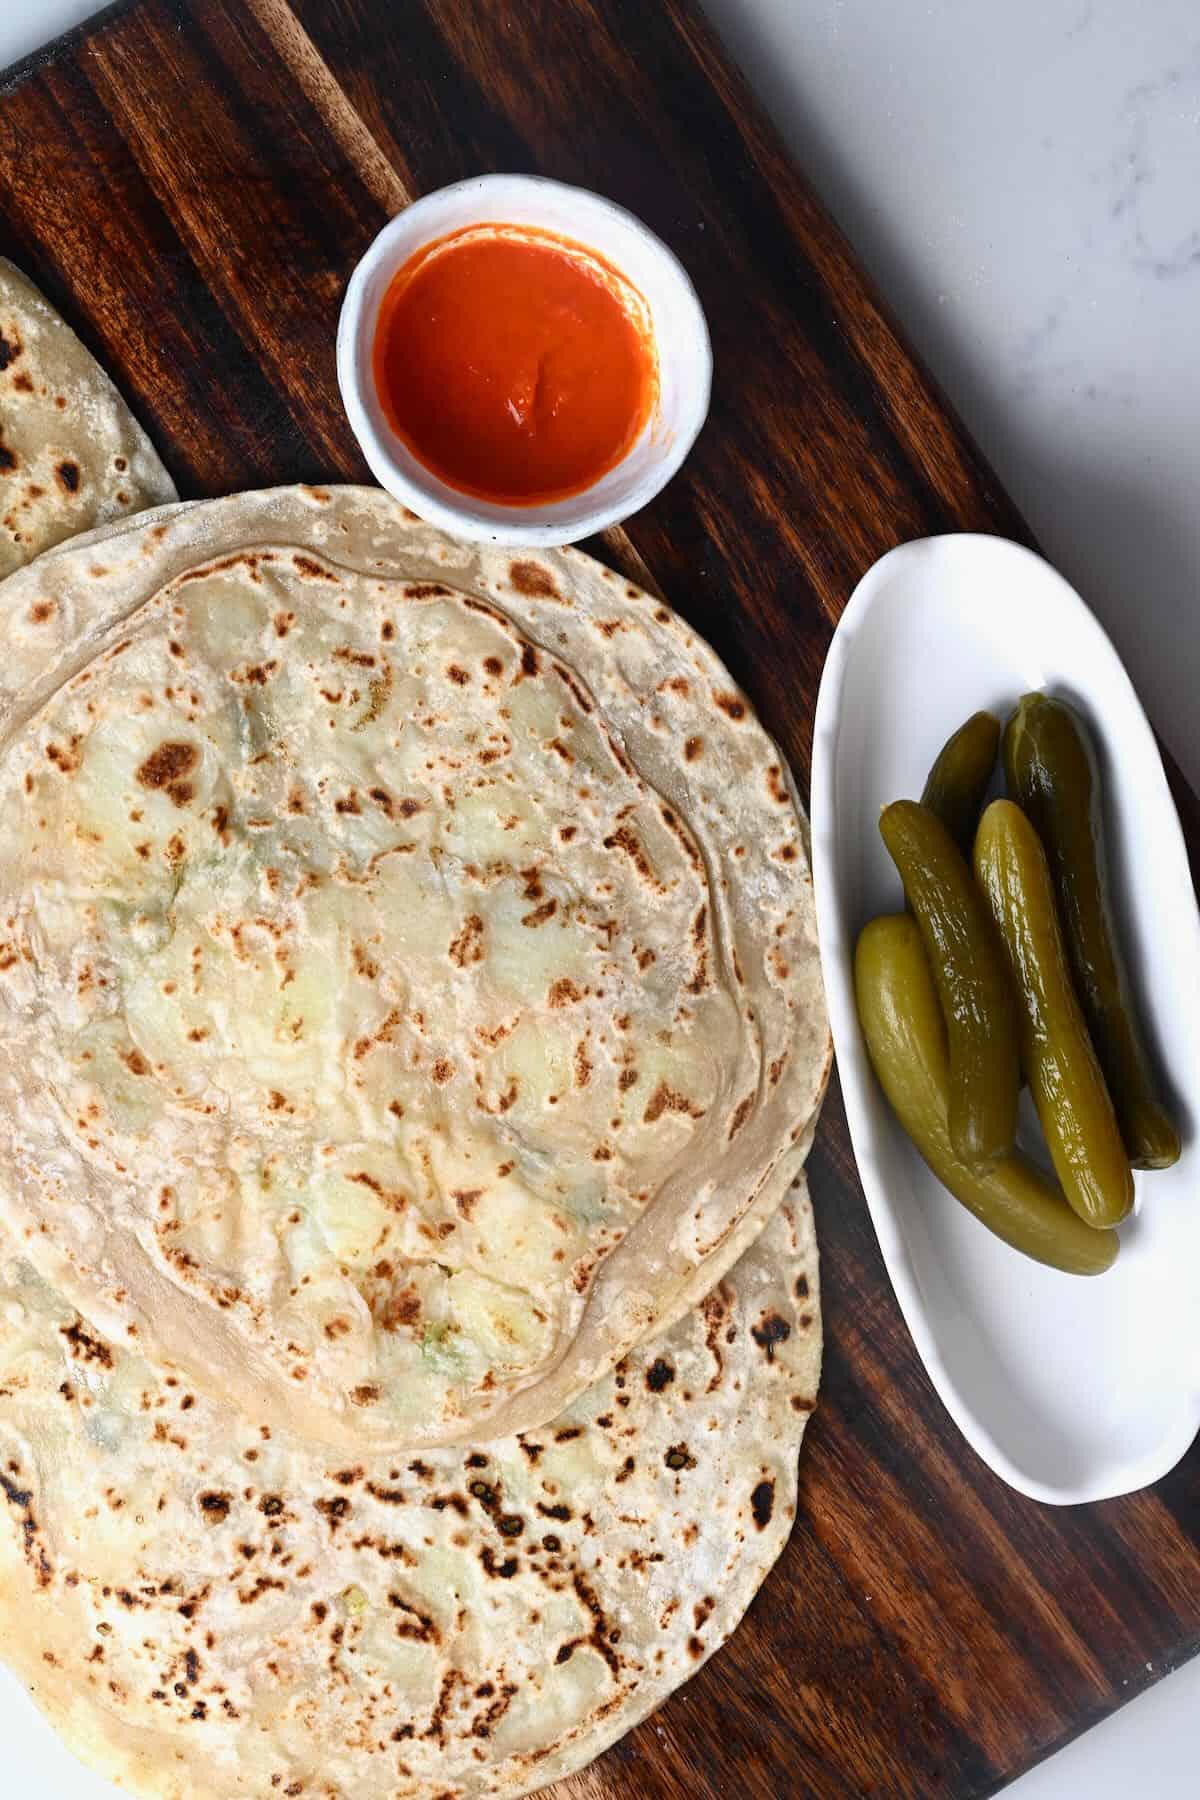 Homeamde aloo paratha with chili sauce and pickles